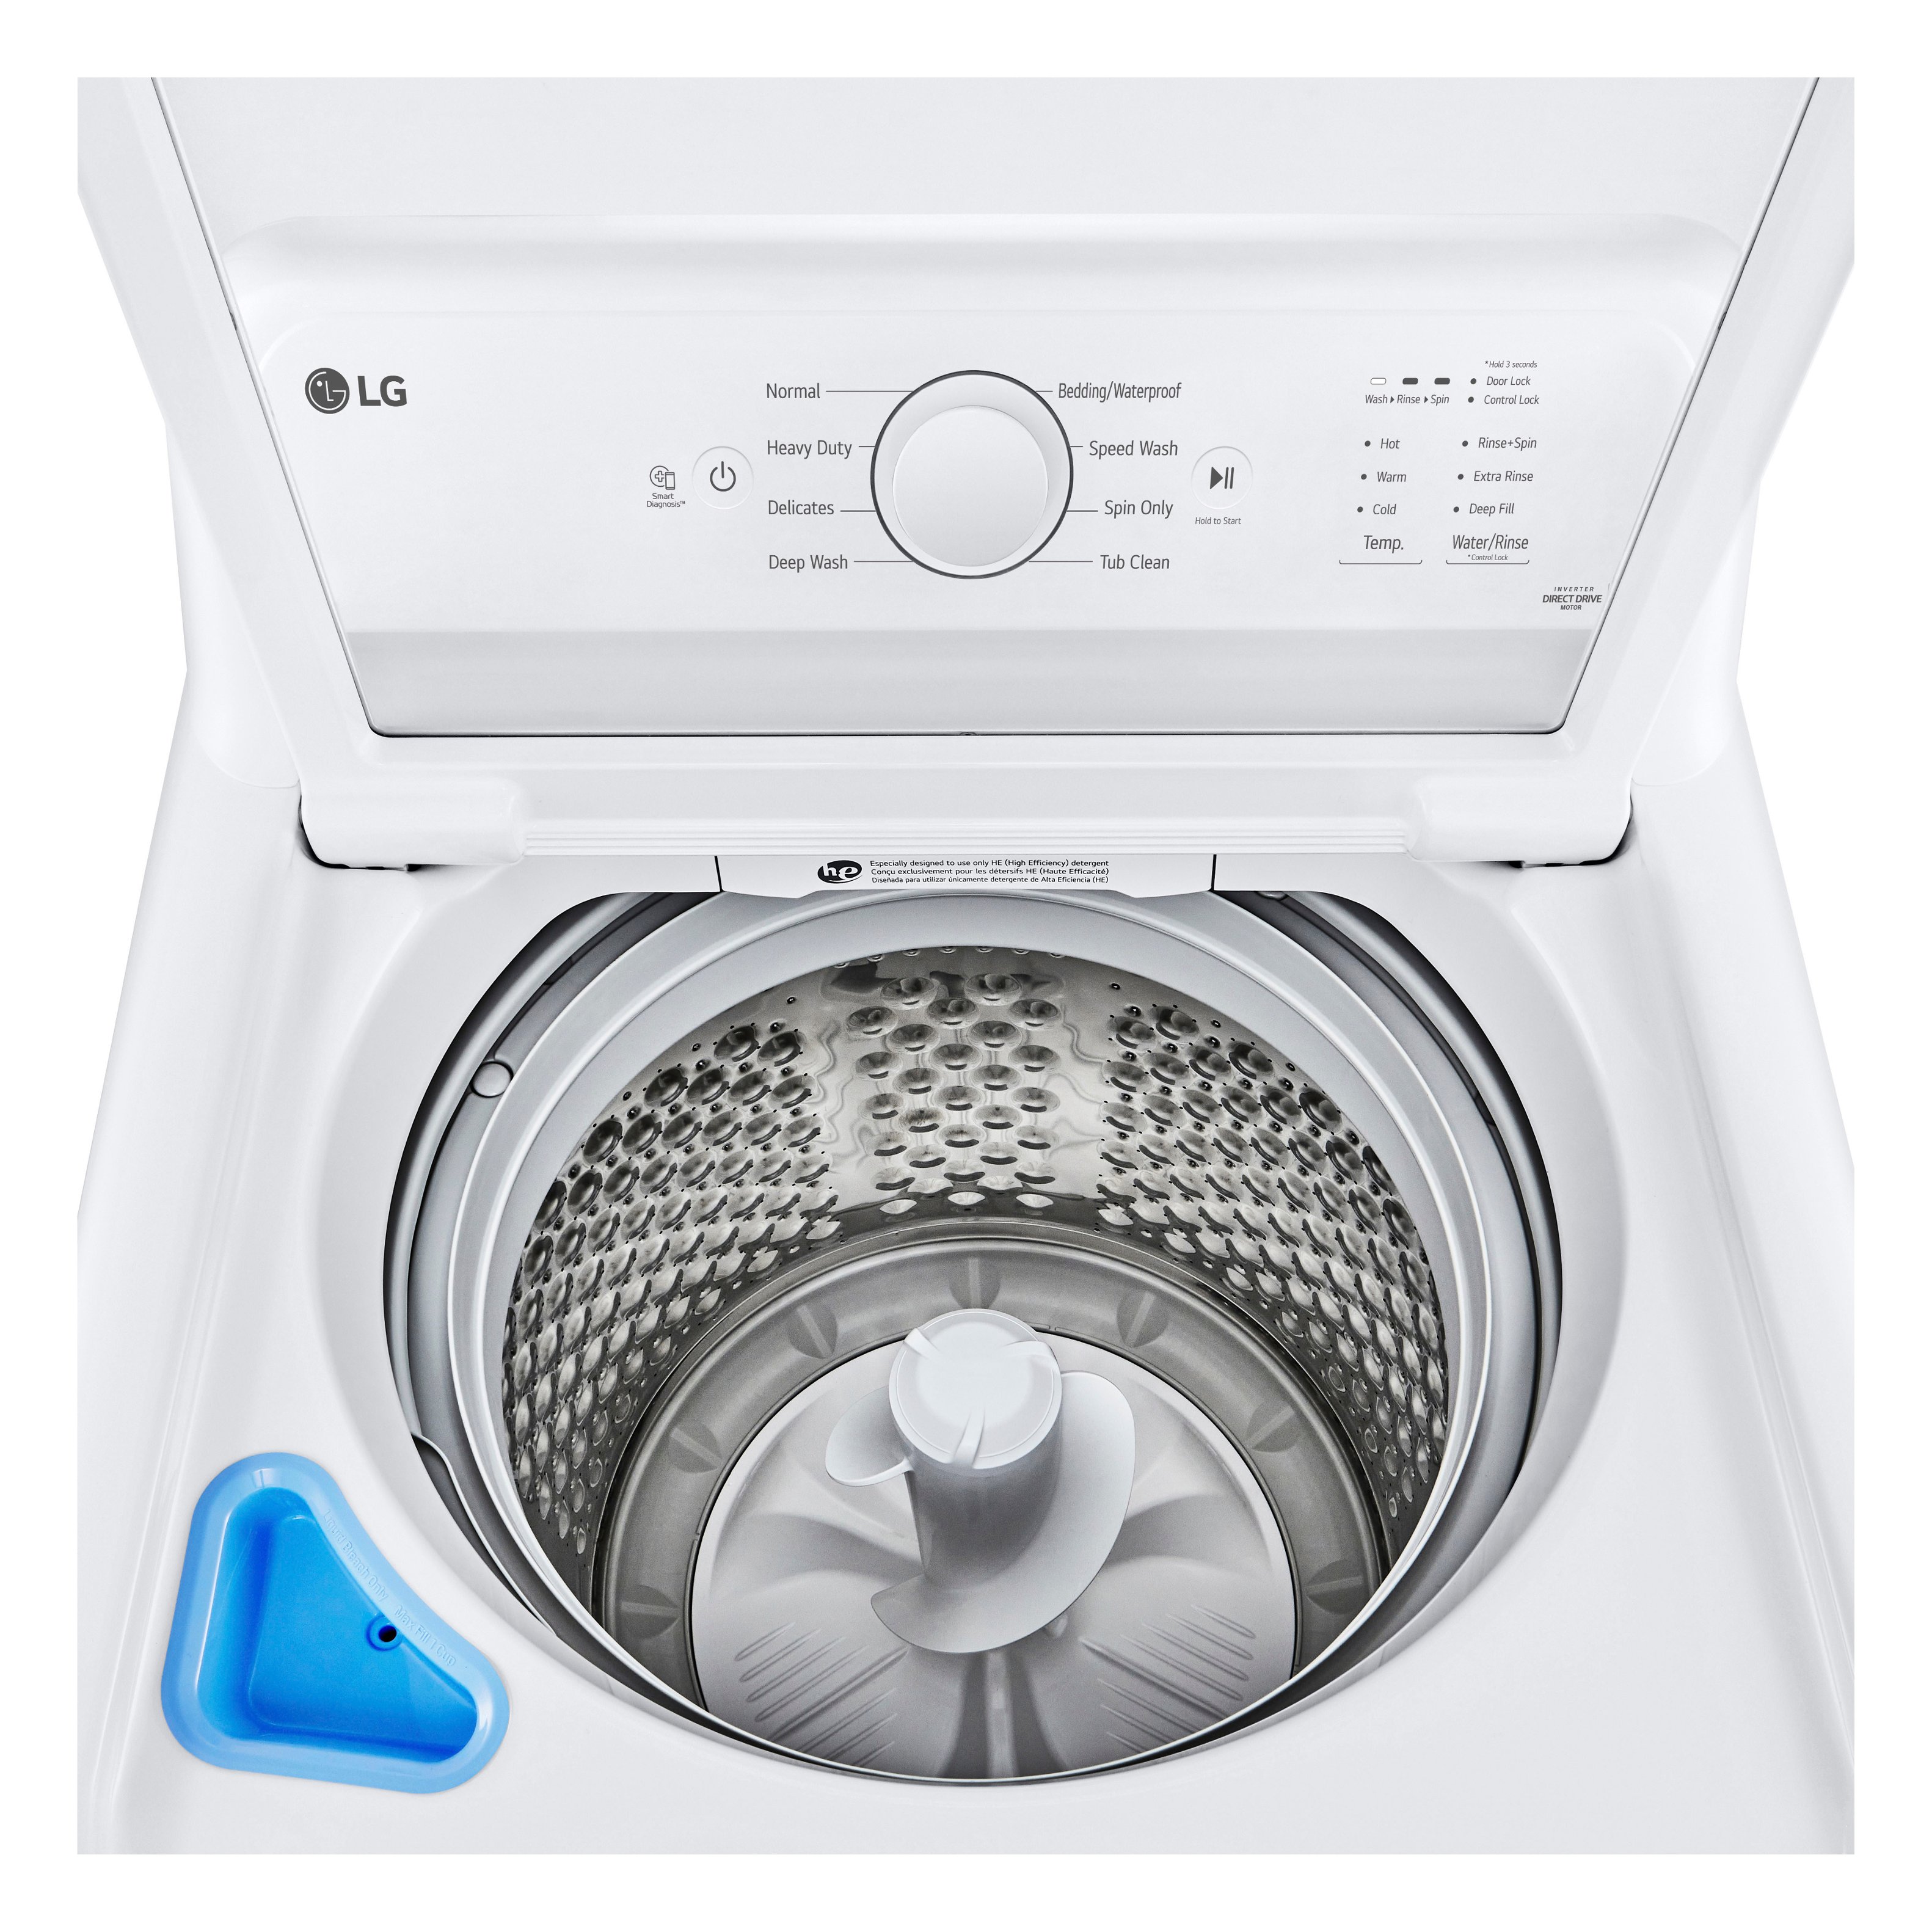 Load 4.1 Ft. Best - SlamProof Glass White Buy with WT6105CW Top LG Cu. Washer Lid